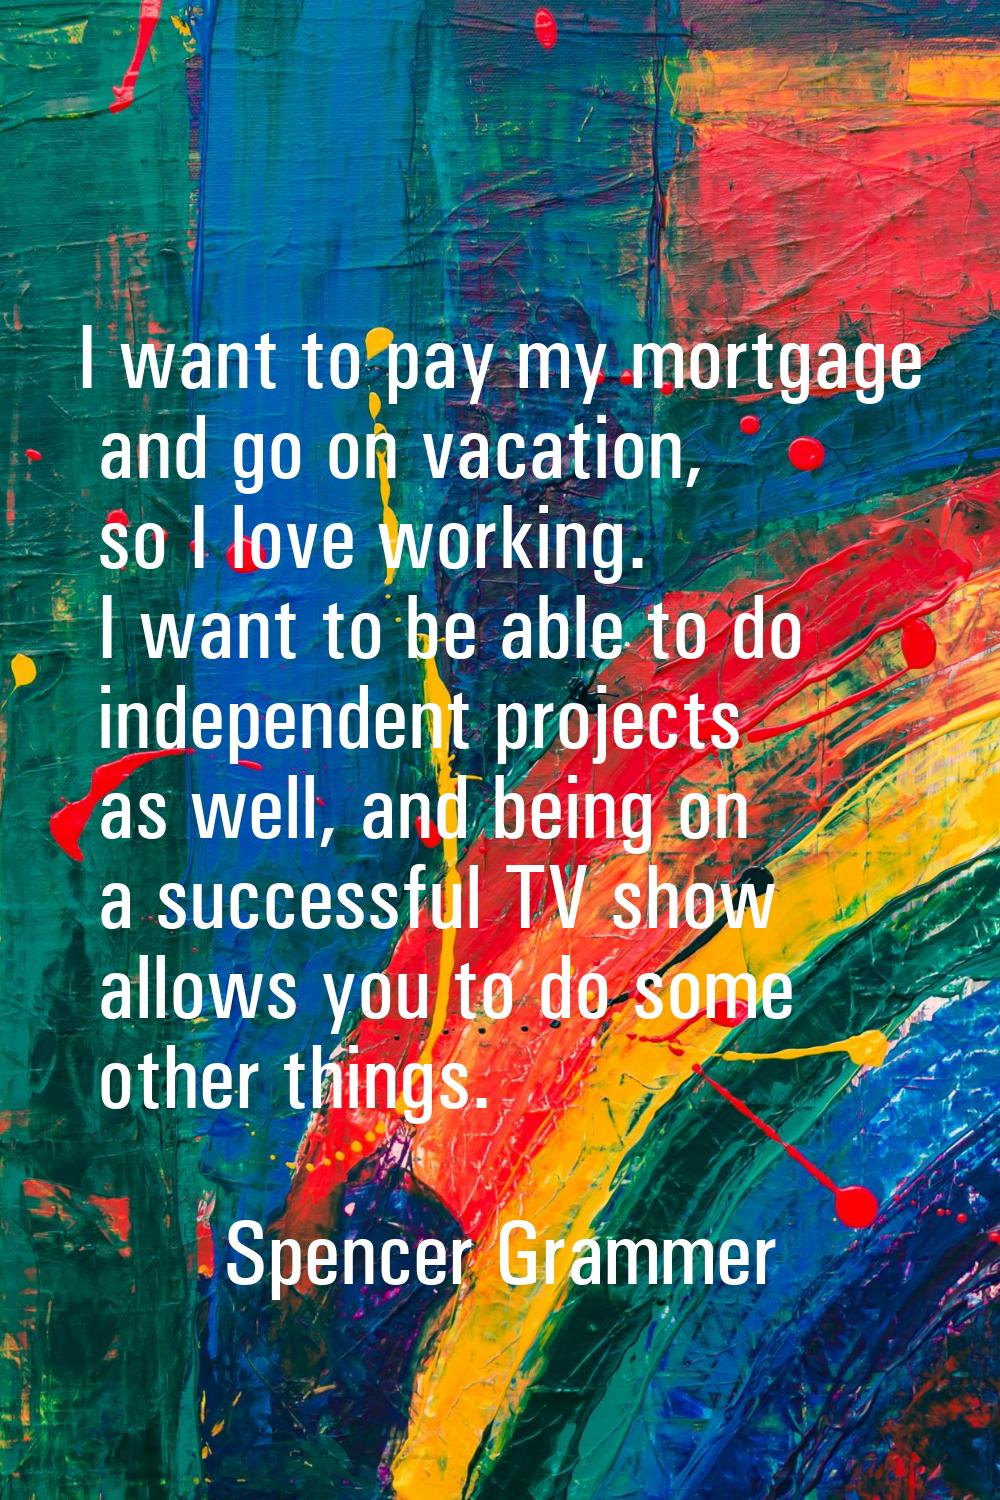 I want to pay my mortgage and go on vacation, so I love working. I want to be able to do independen